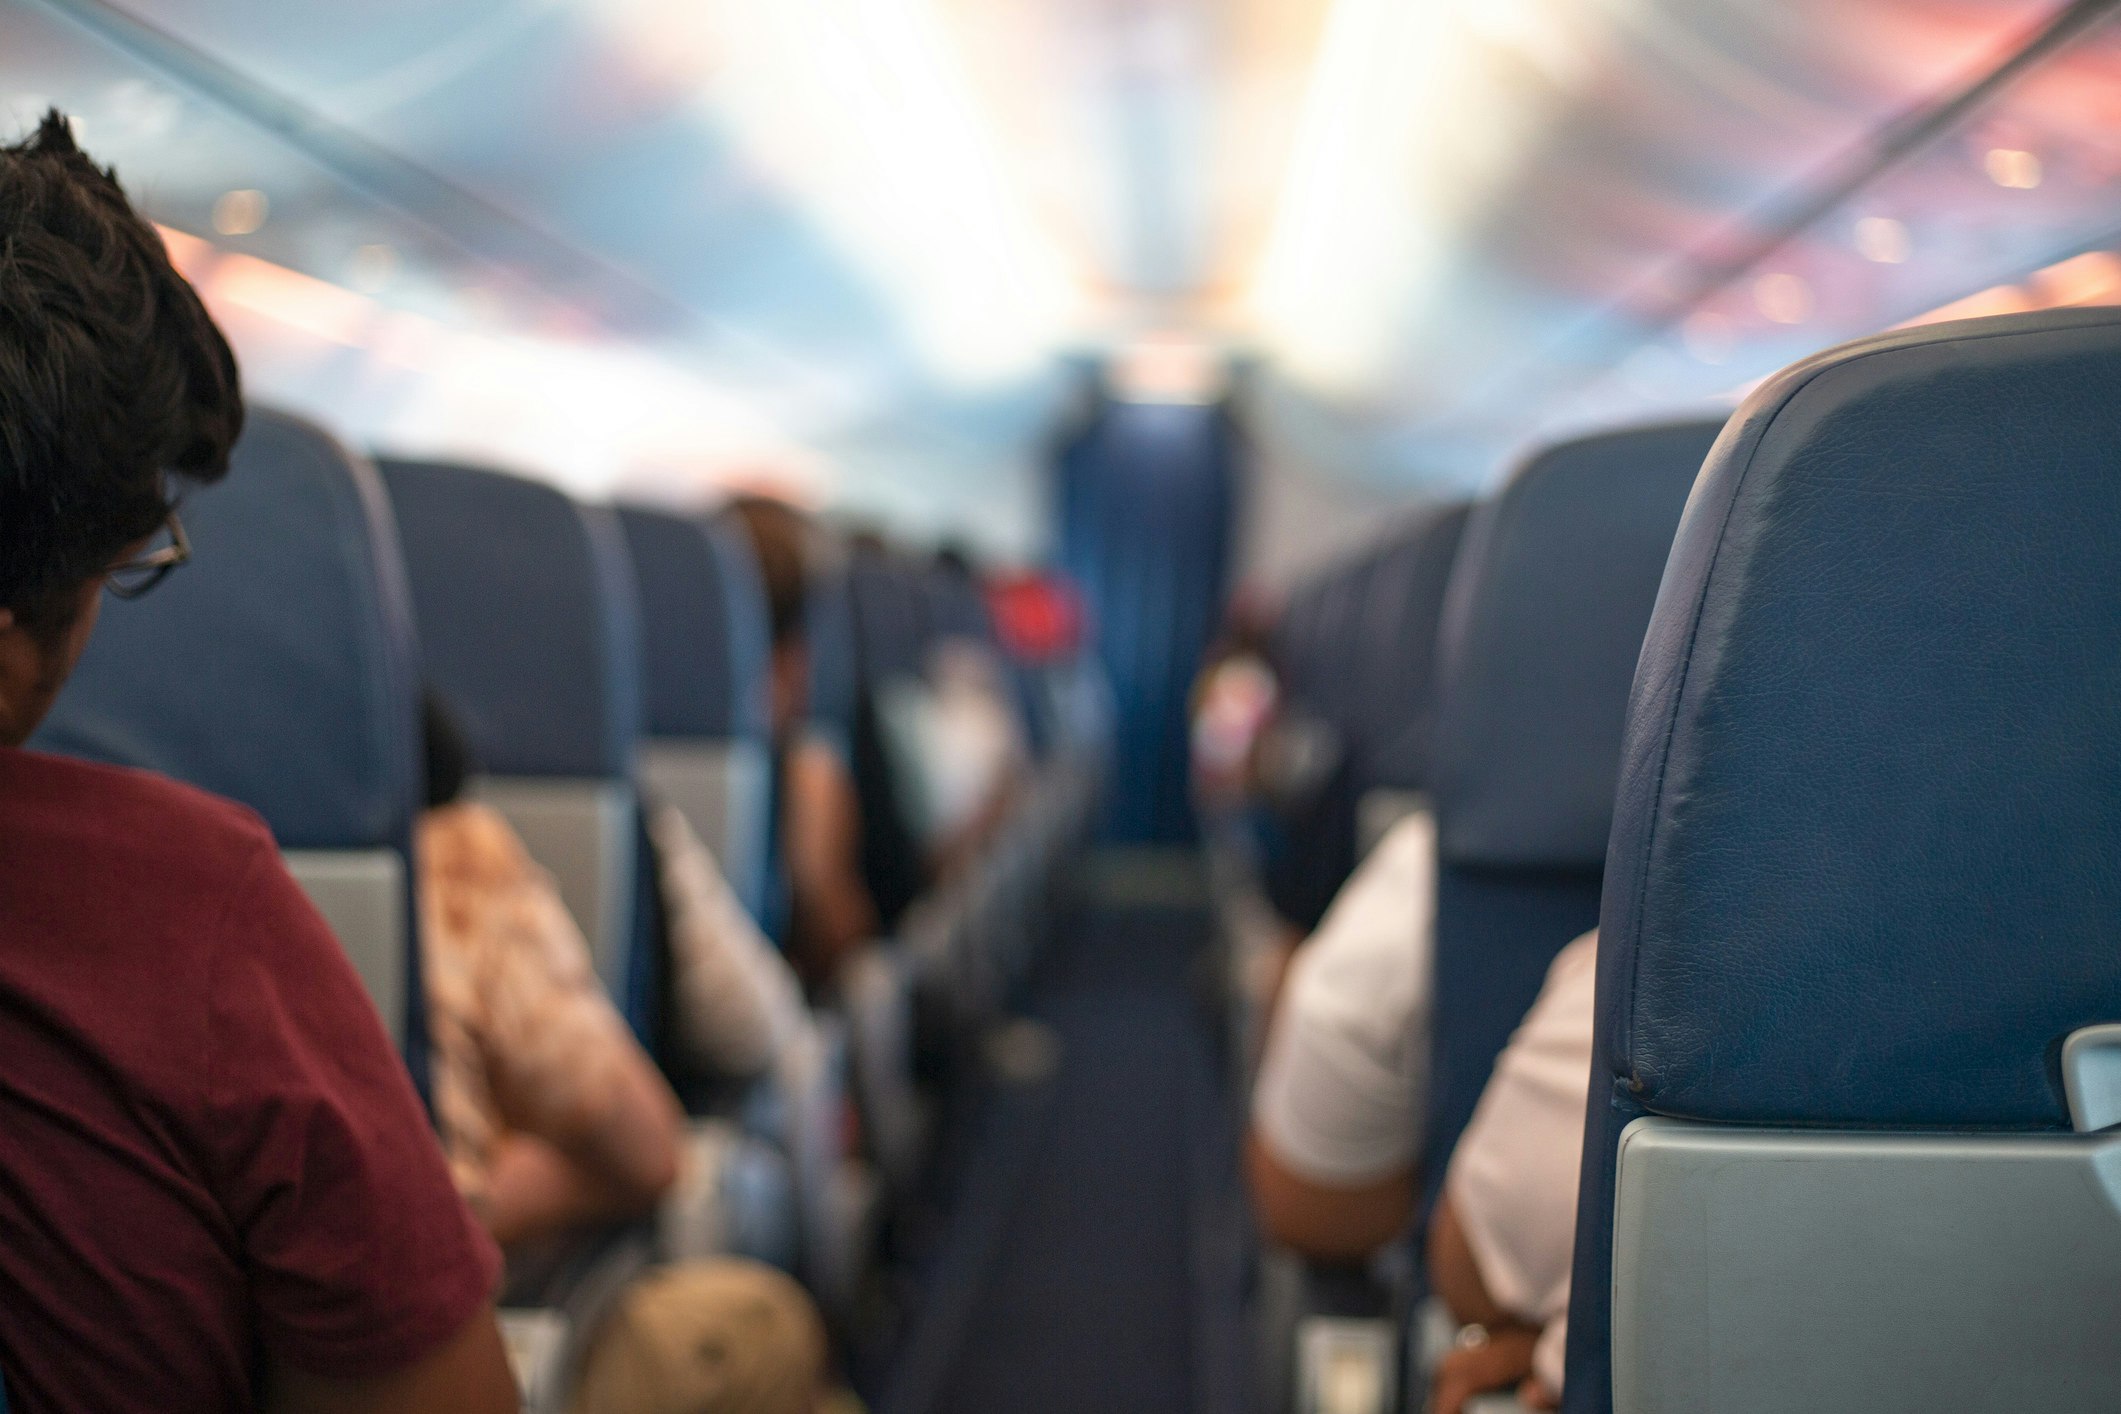 The interior of a plane from the aisle. The back of a woman's head and her right shoulder are partially visible from behind a seat. Other passengers are in shot but out of focus.